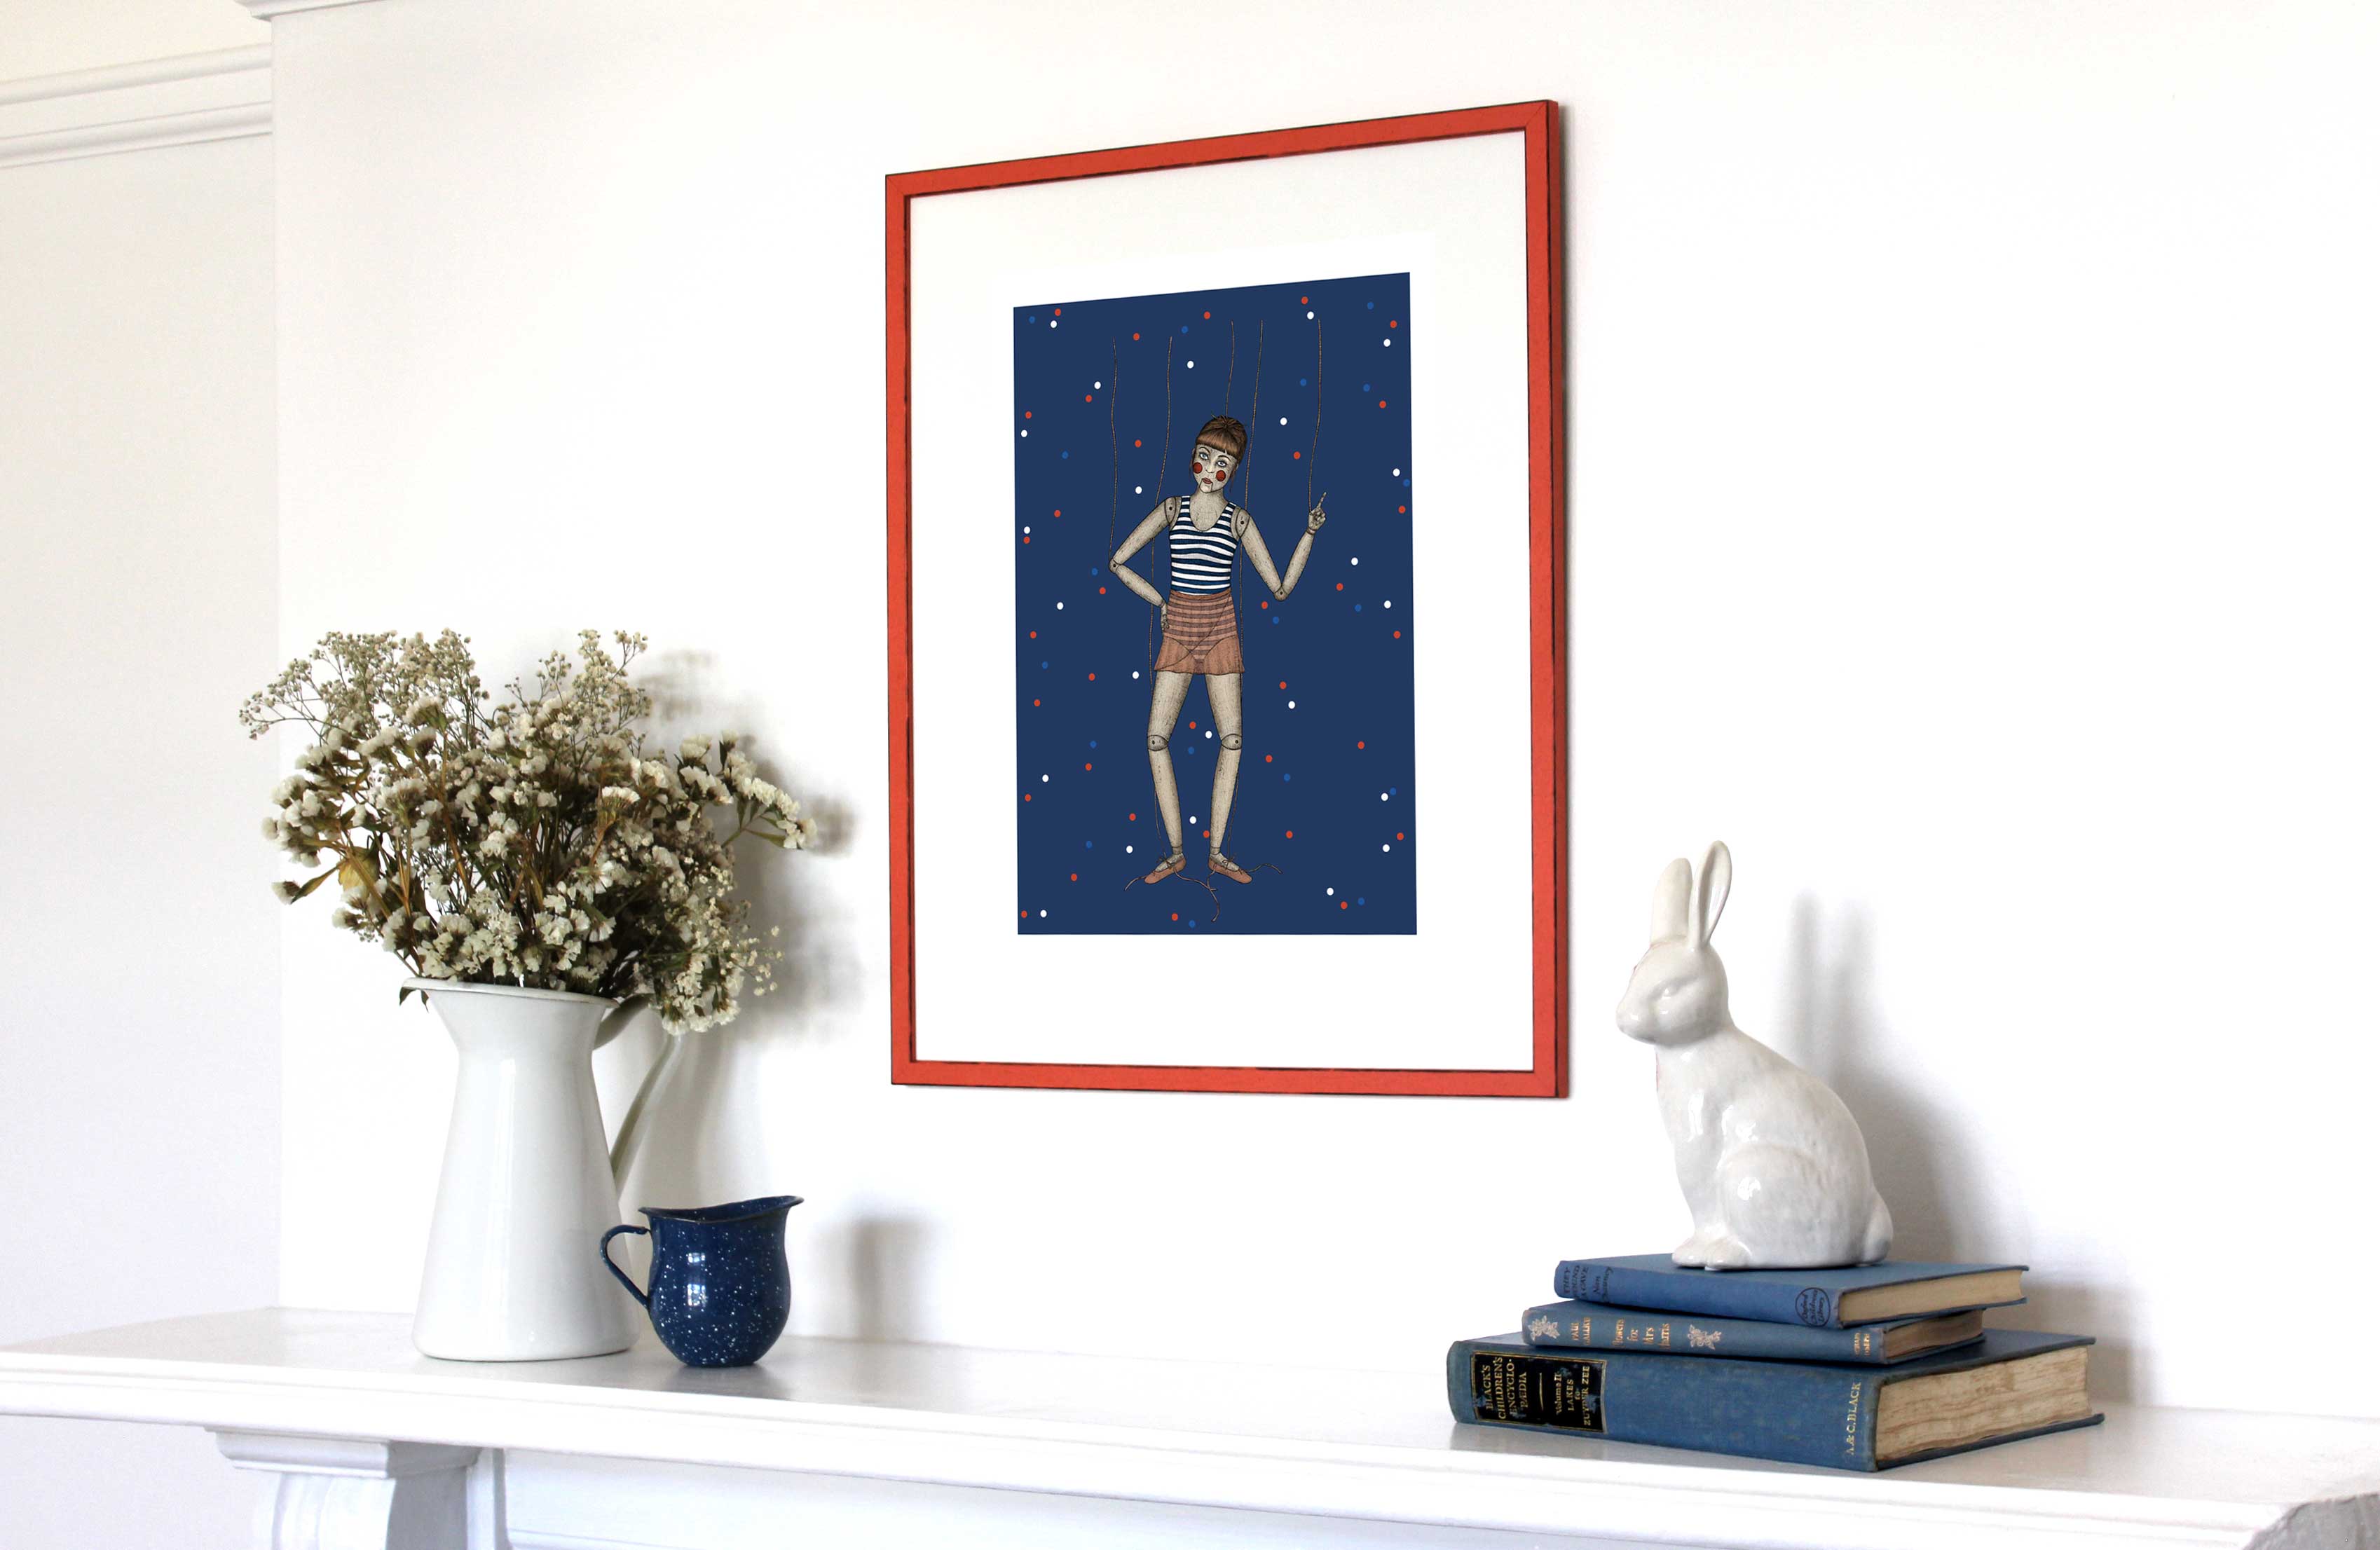 Art print in an orange frame hanging above a mantle.